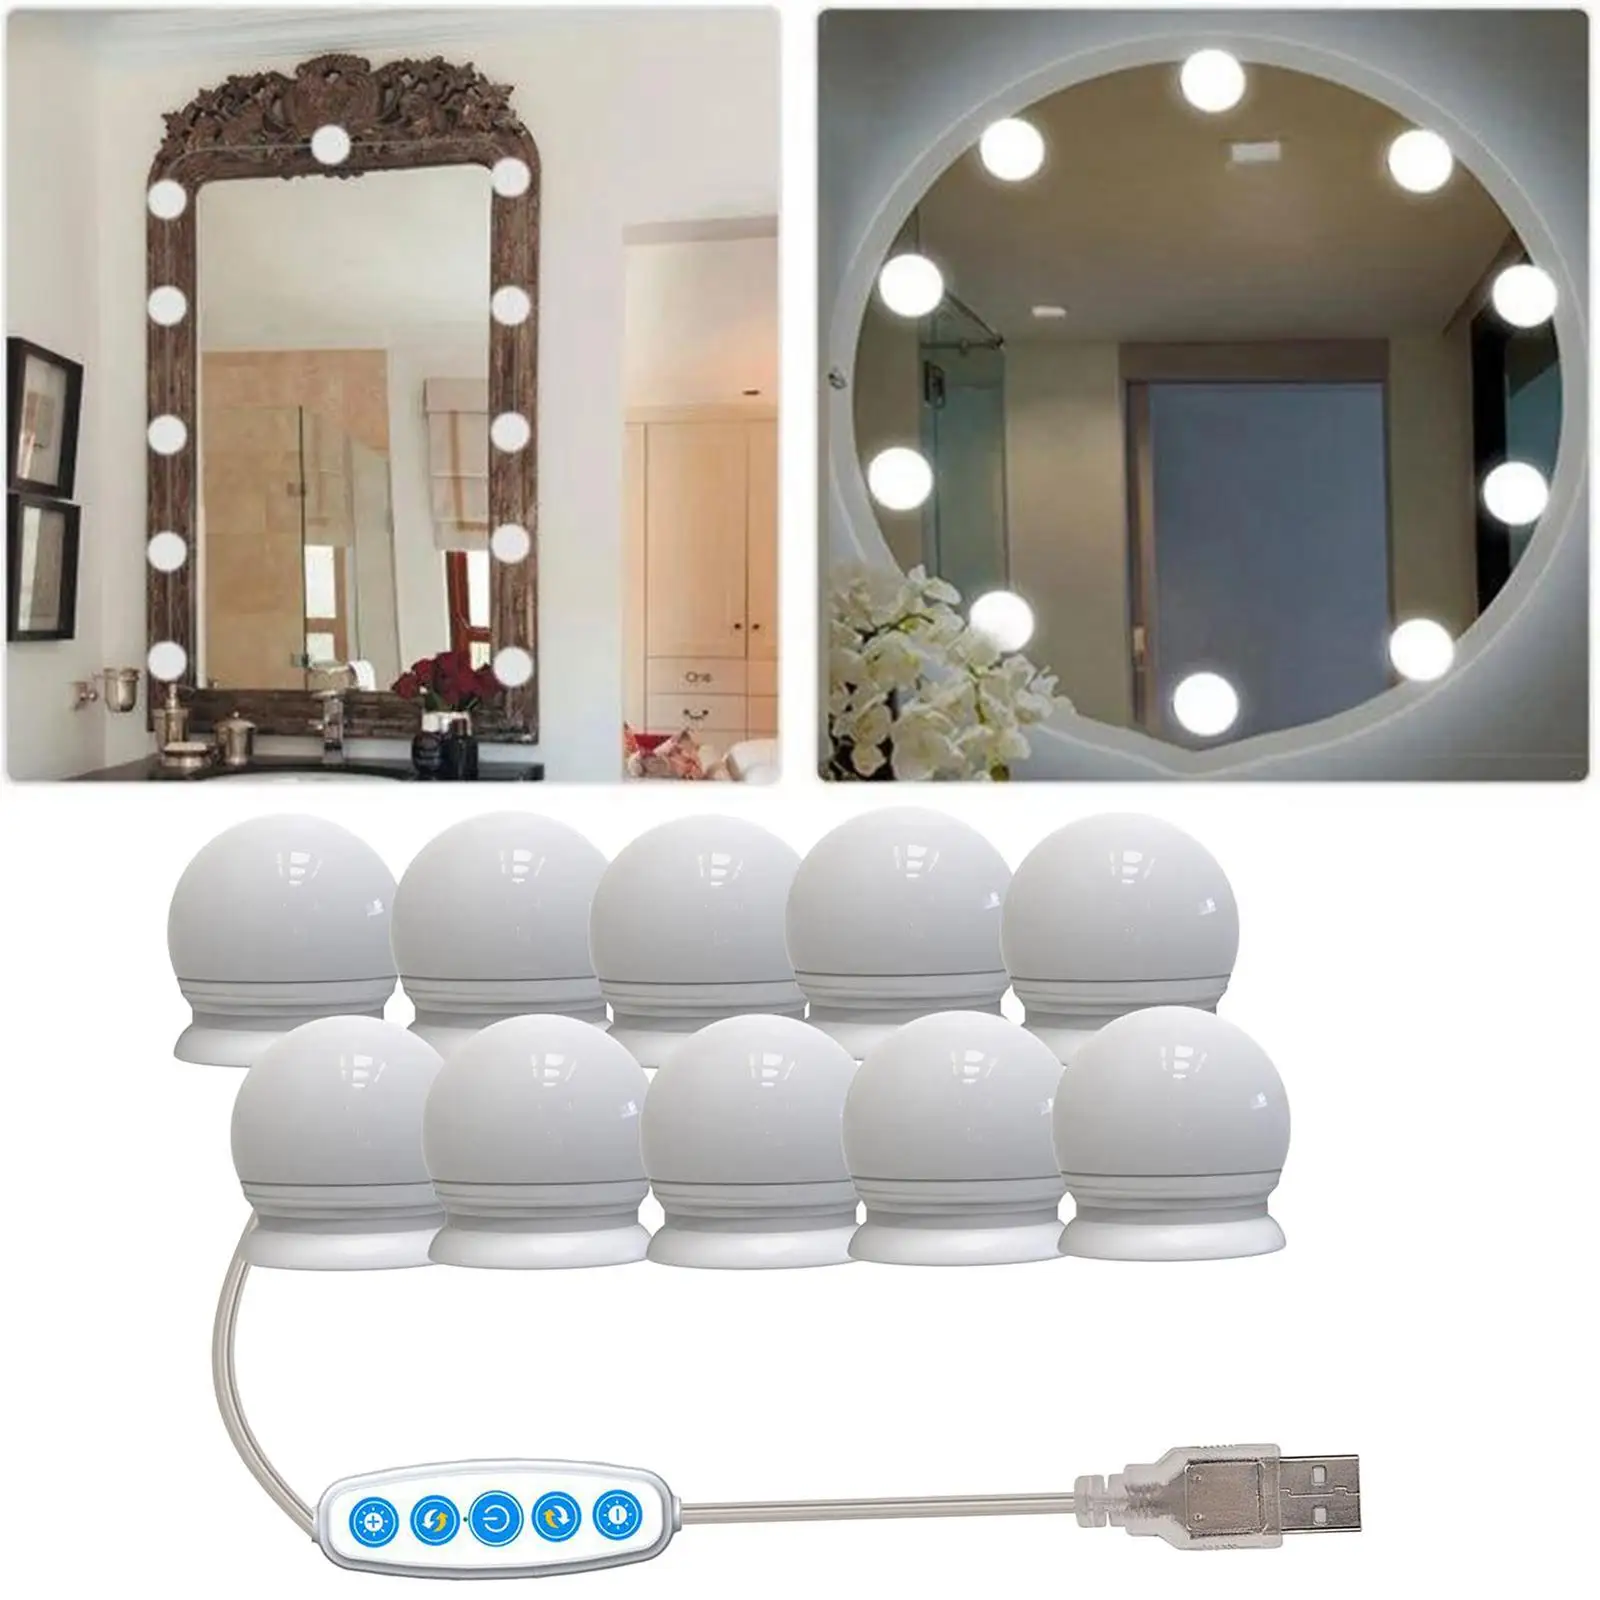   Makeup Lighted Vanity Mirror Lights 10 LED Bulbs Dimmable Tabletops